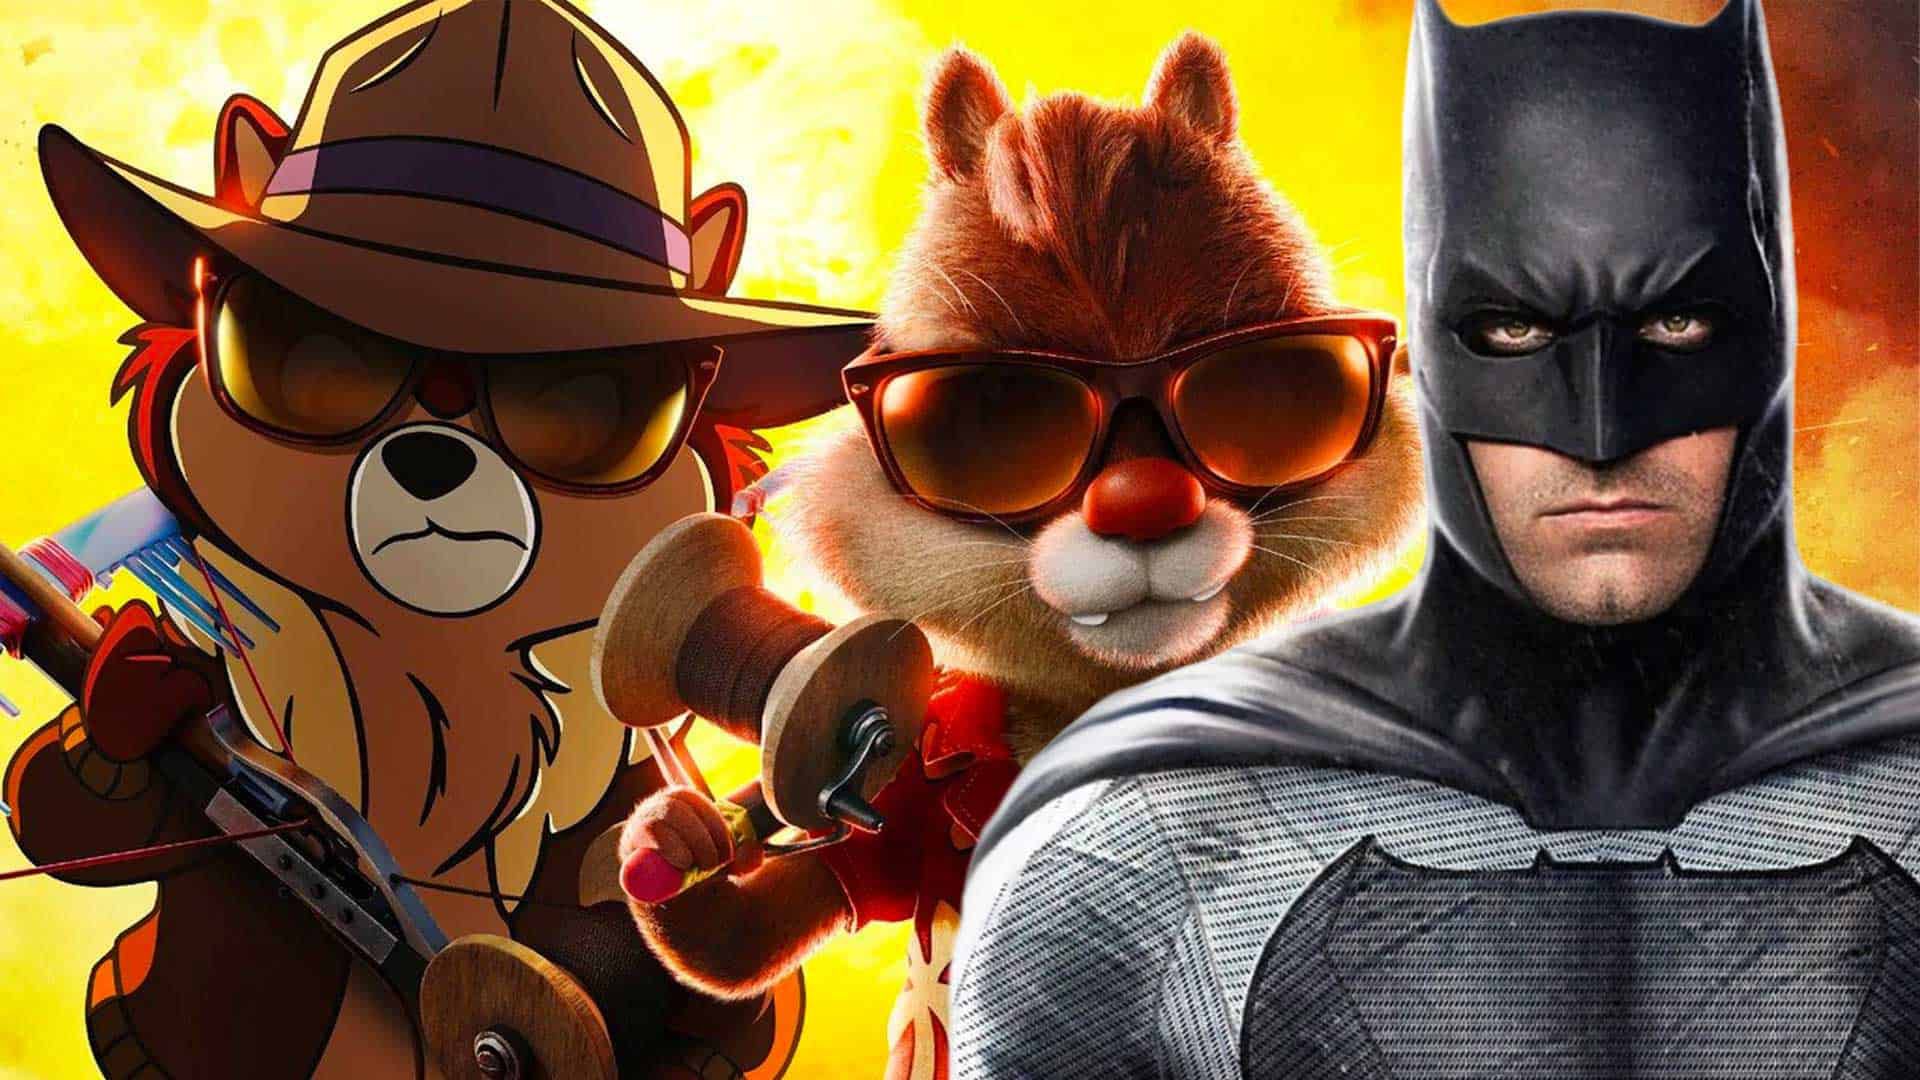 Zack Snyder’s Batman Joins The Disney Universe In Chip And Dale